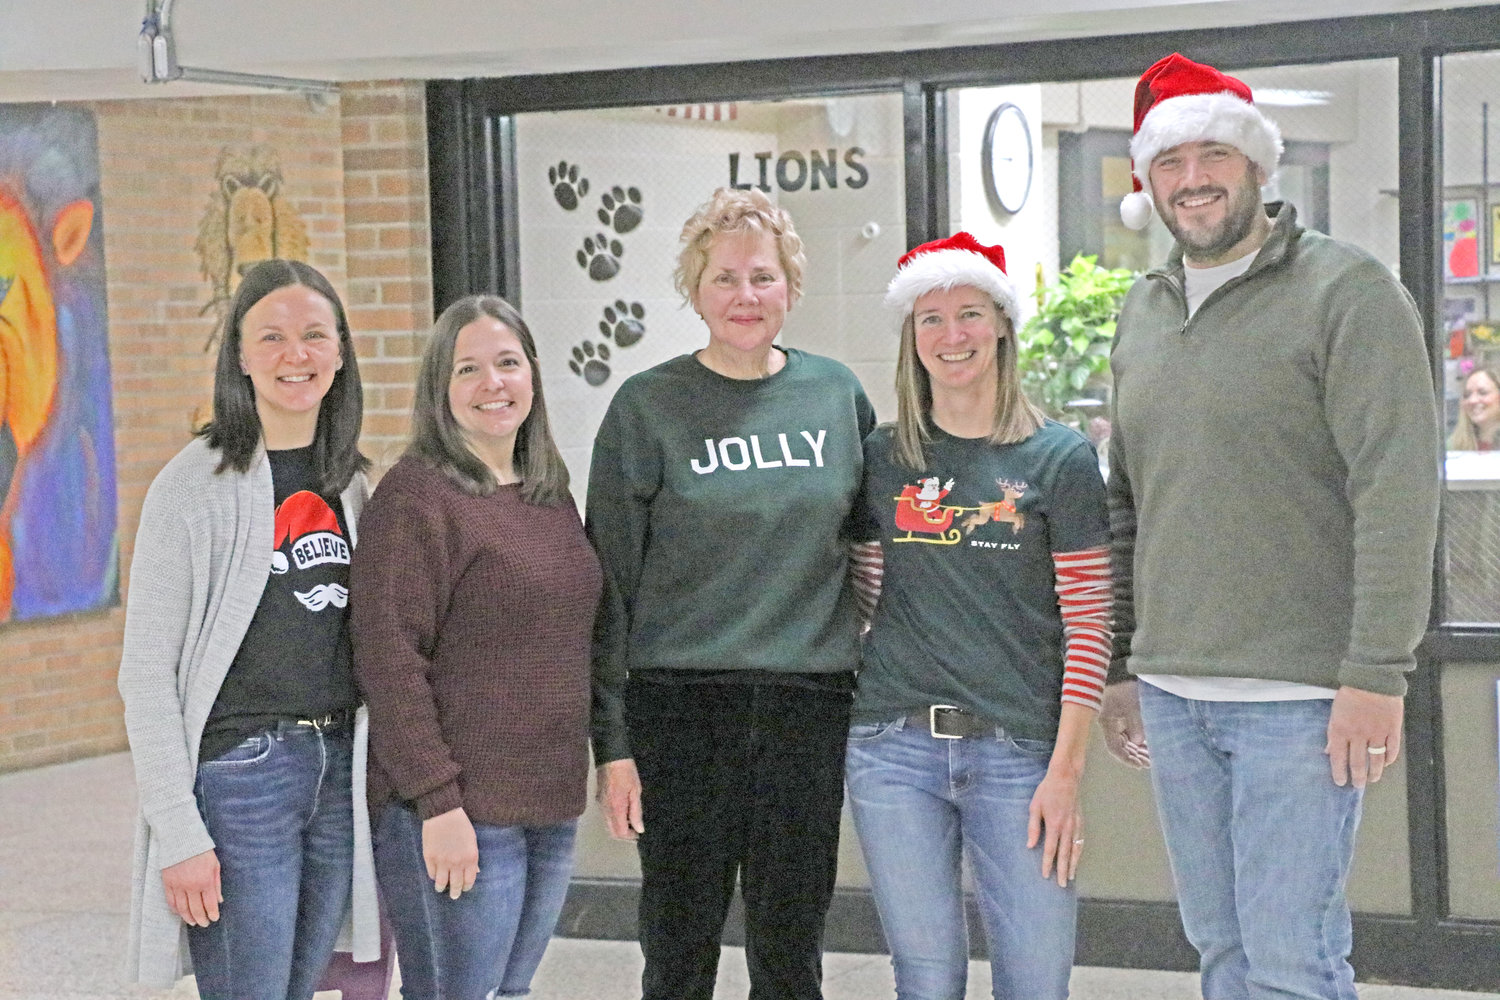 PTO and school board members pose for a picture after thanking Wanda Anderson for her time spent teaching at Lone Tree: Mallory Finn, Diana Bandow, Wanda Anderson, Jessica Hotz, Robert Sladek.